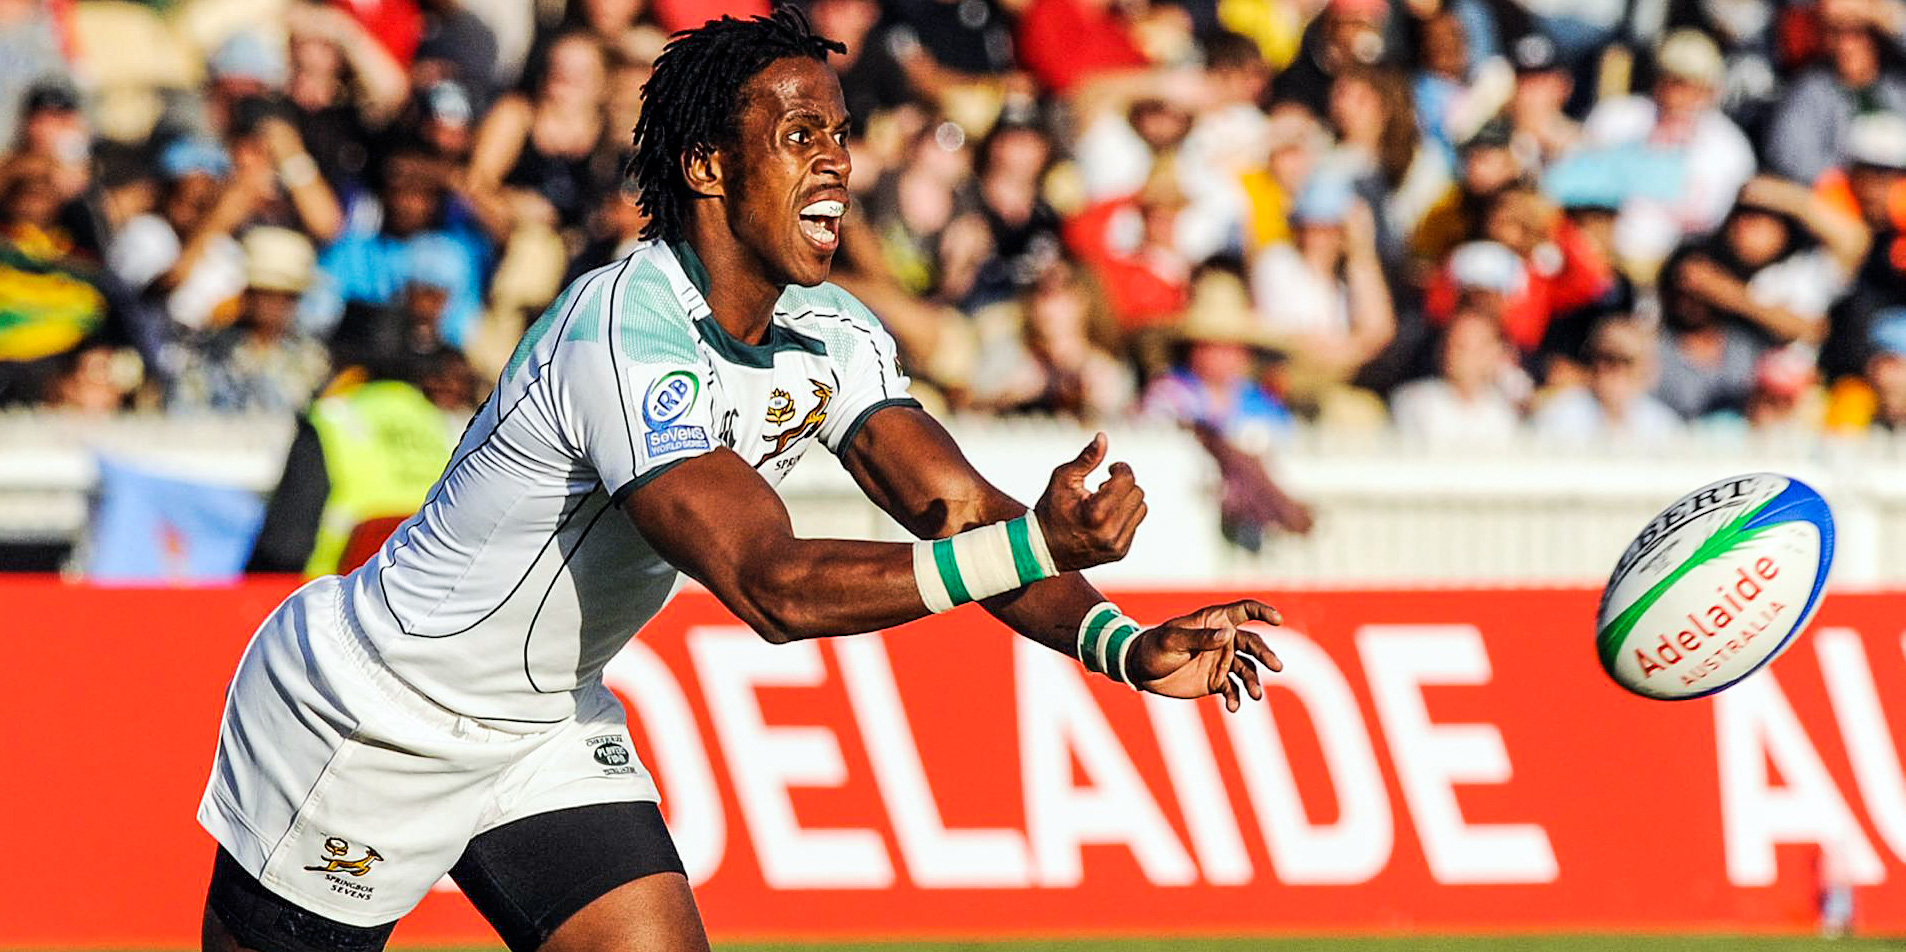 Mzwandile Stick in action for the Blitzboks in Adelaide in 2009, when they won the World Series tournament.